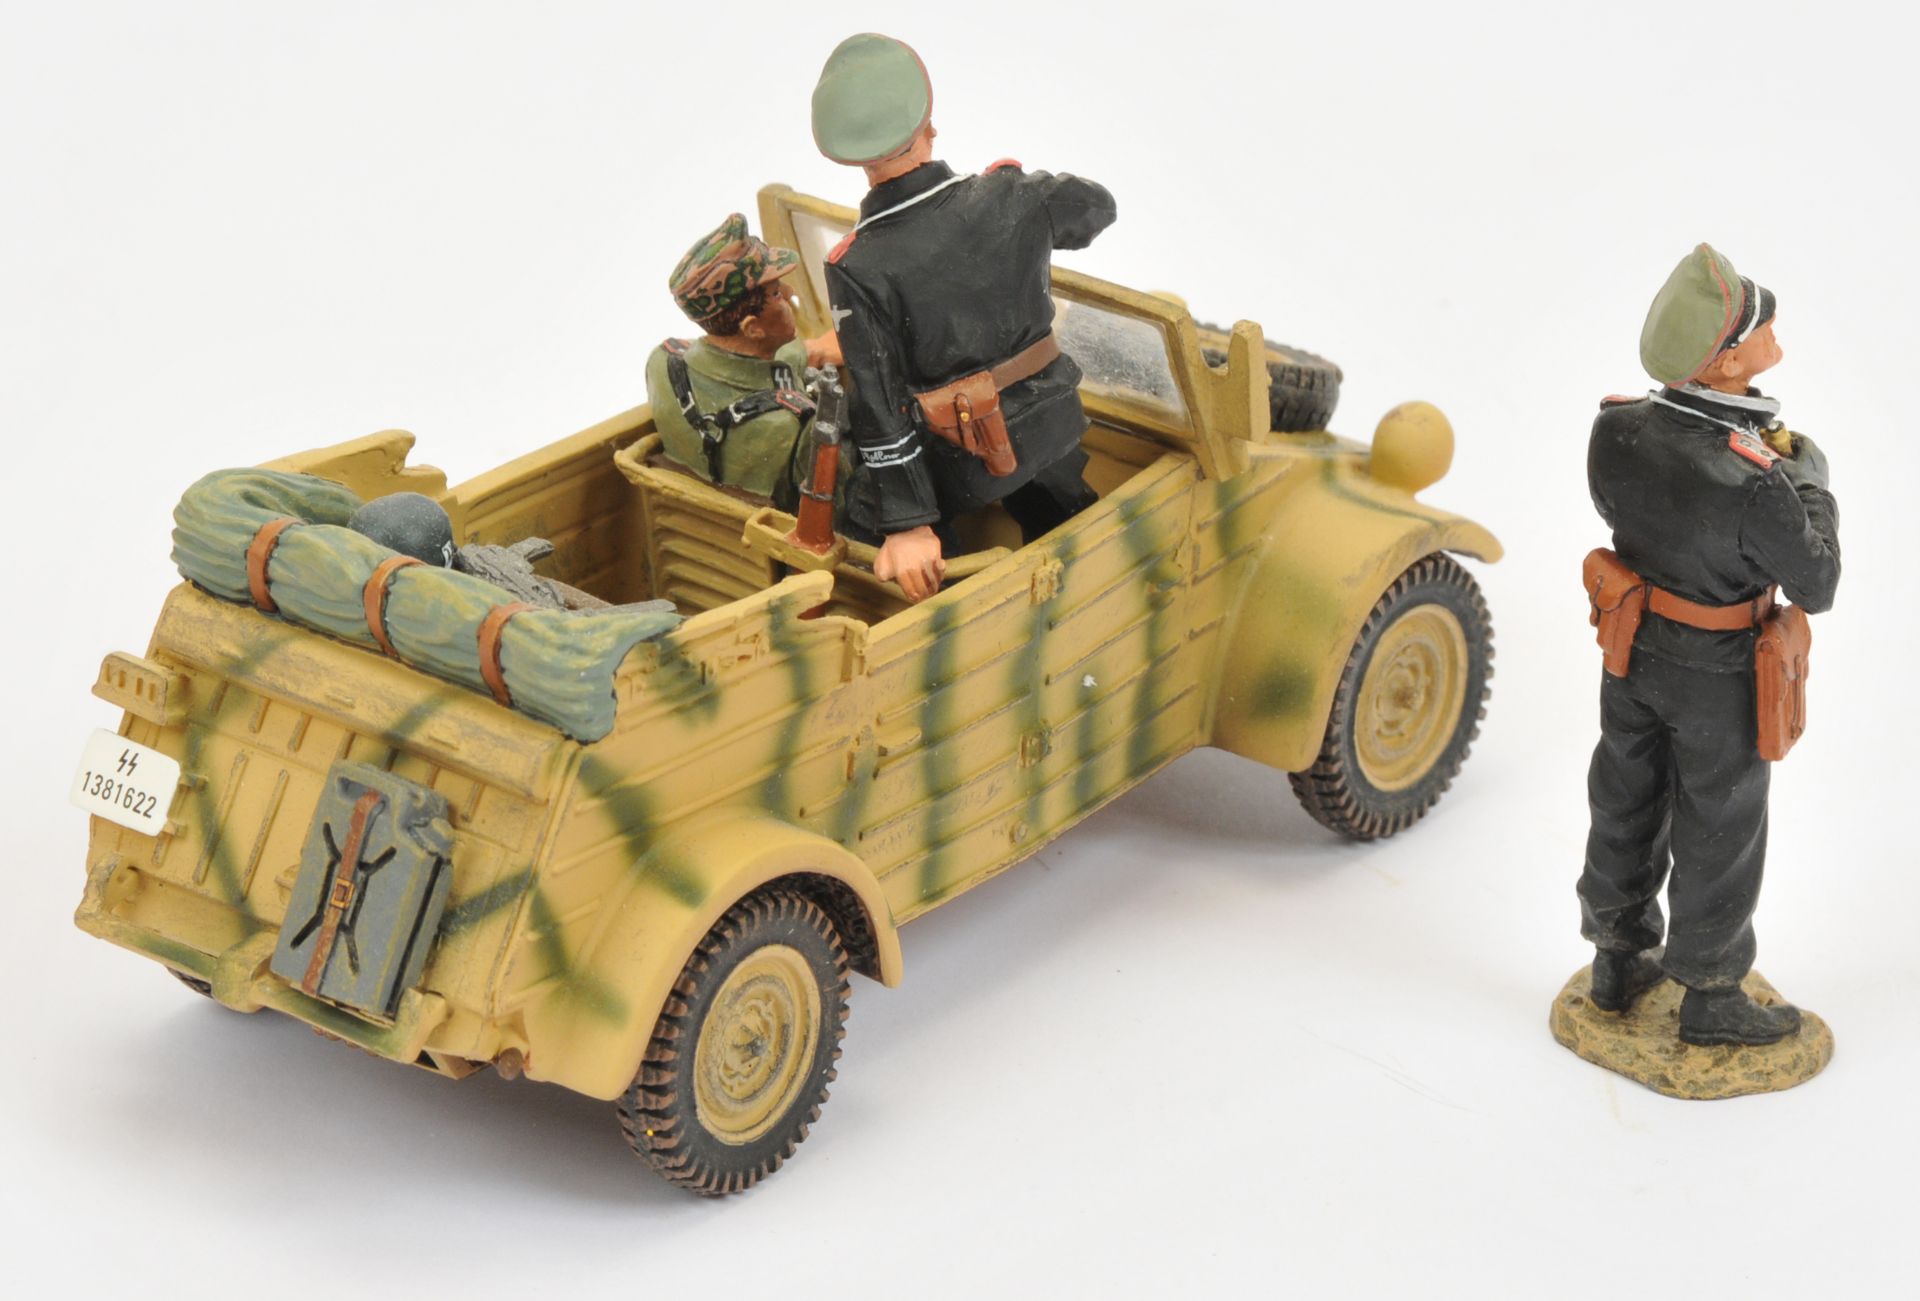 King & Country WWII German Forces Normandy Kublewagen - Image 2 of 2